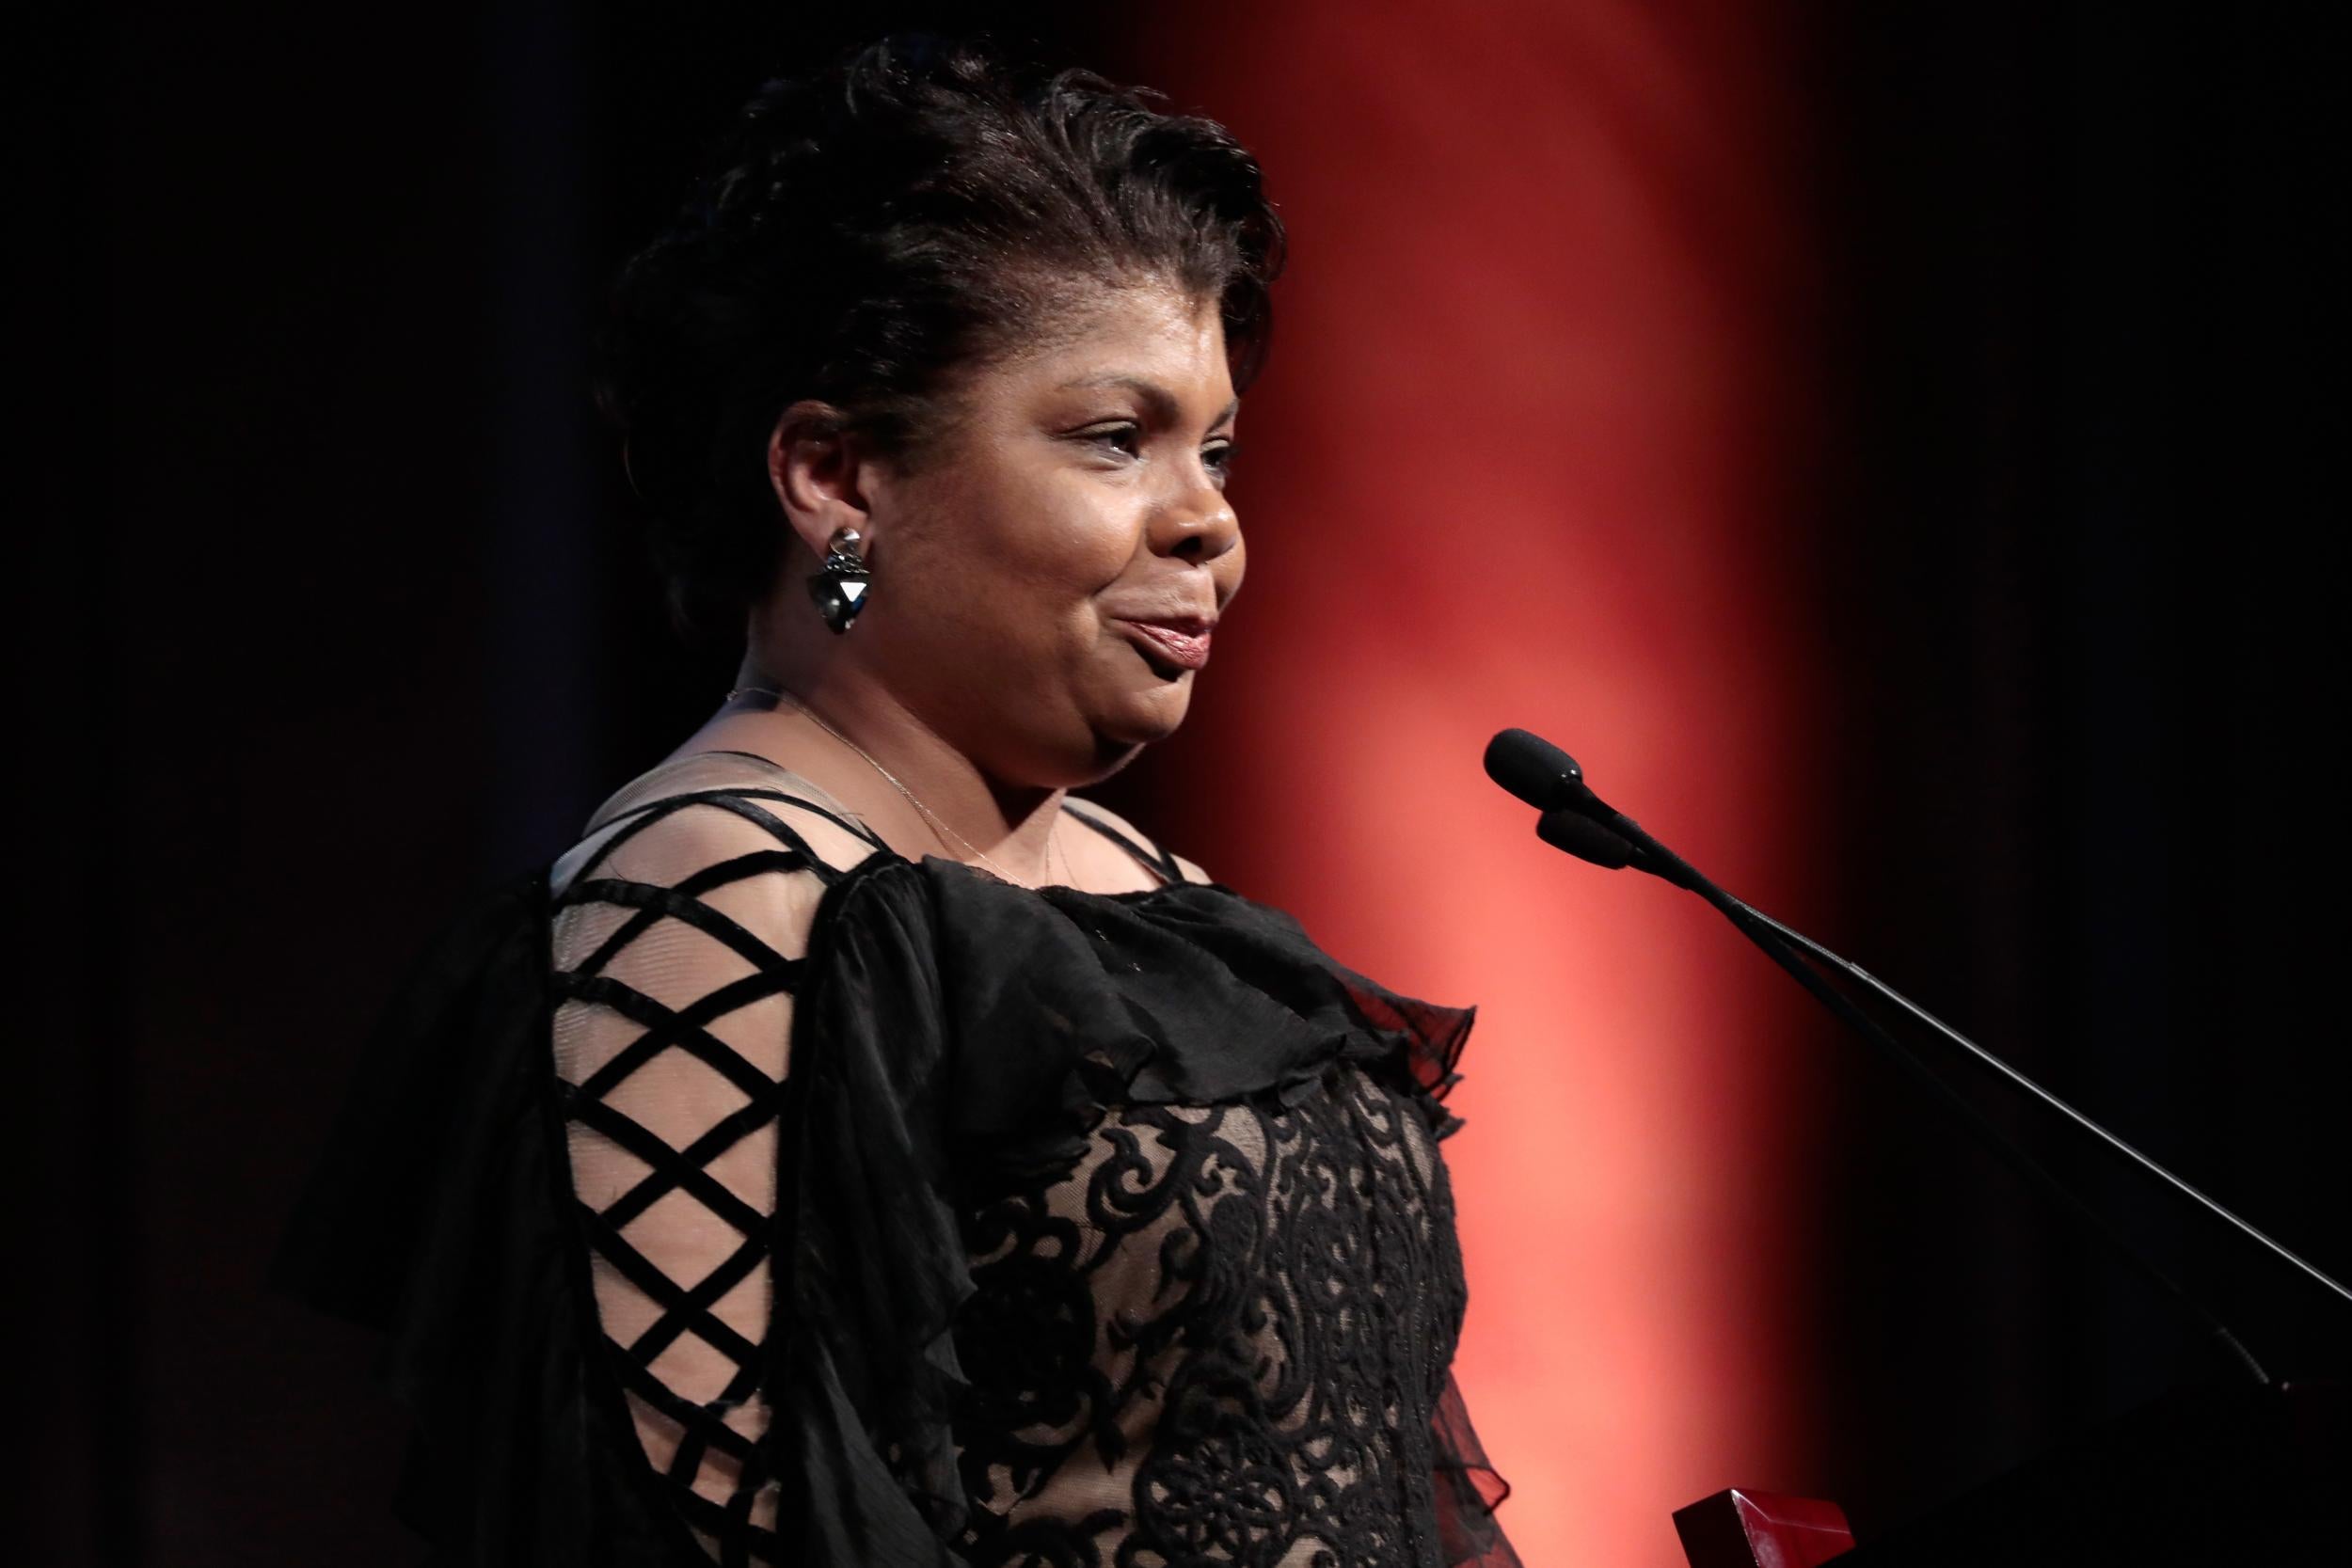 Journalist April Ryan accepts the WMC She Persisted Award onstage at the Women's Media Center 2017 Women's Media Awards